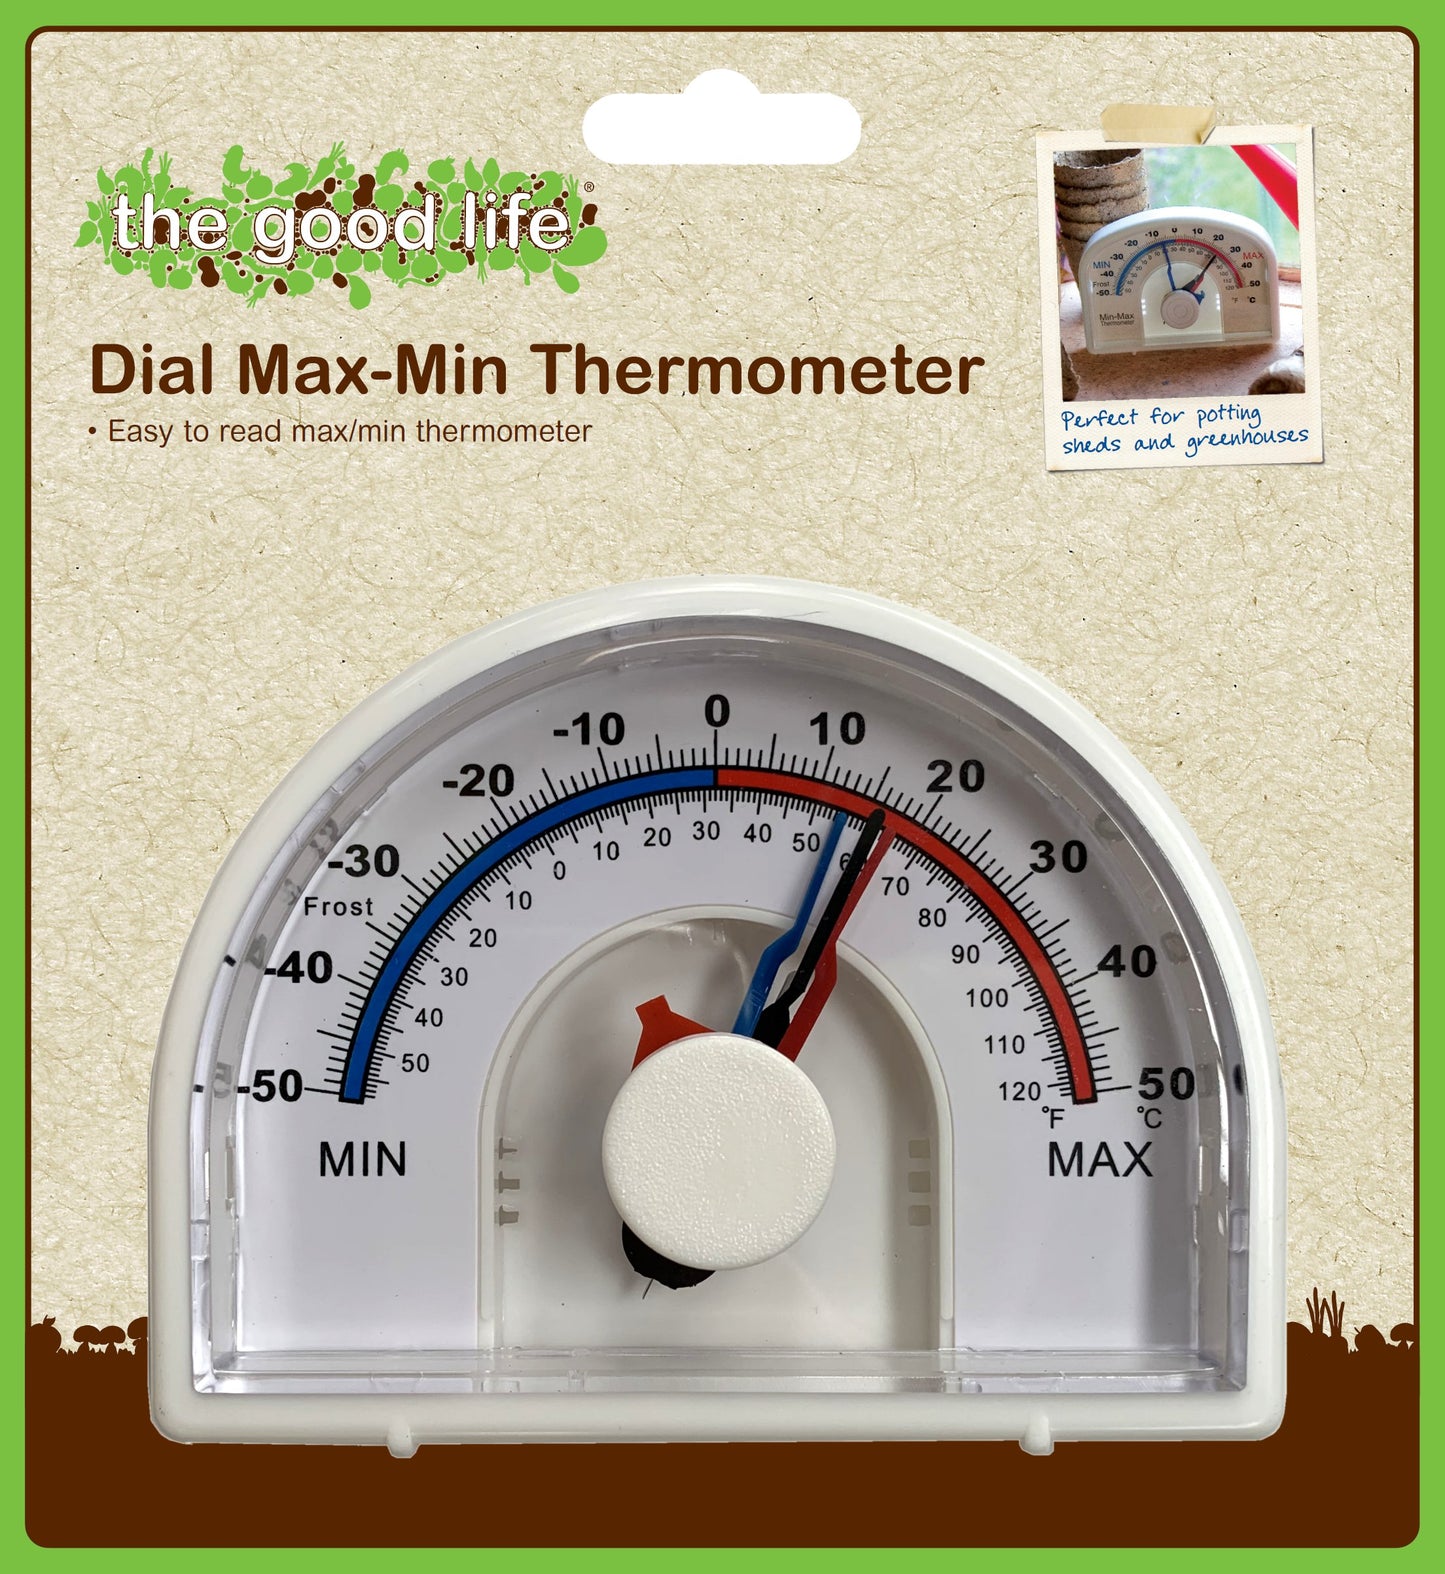 The Good Life Dial Max-Min Thermometer